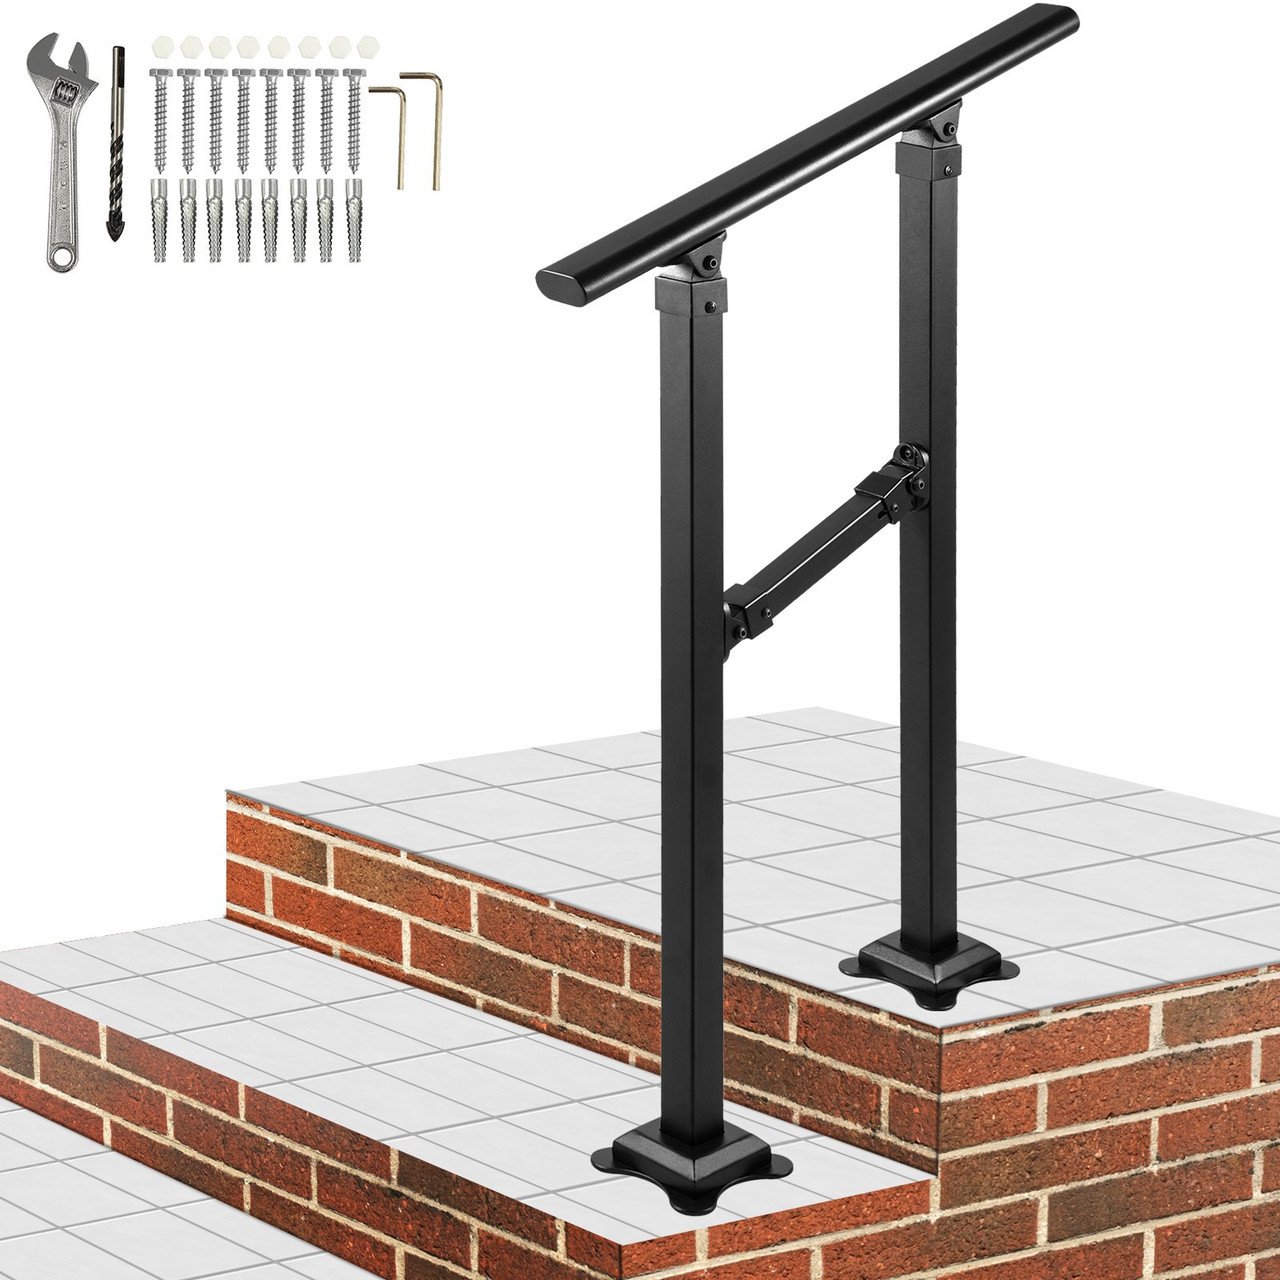 Outdoor Stair Railing, Fits for 0-2 Step Transitional Wrought Iron Handrail, Adjustable Exterior Stair Railing, Handrails for Concrete Steps with Installation Kit, Matte Black Outdoor Handrail